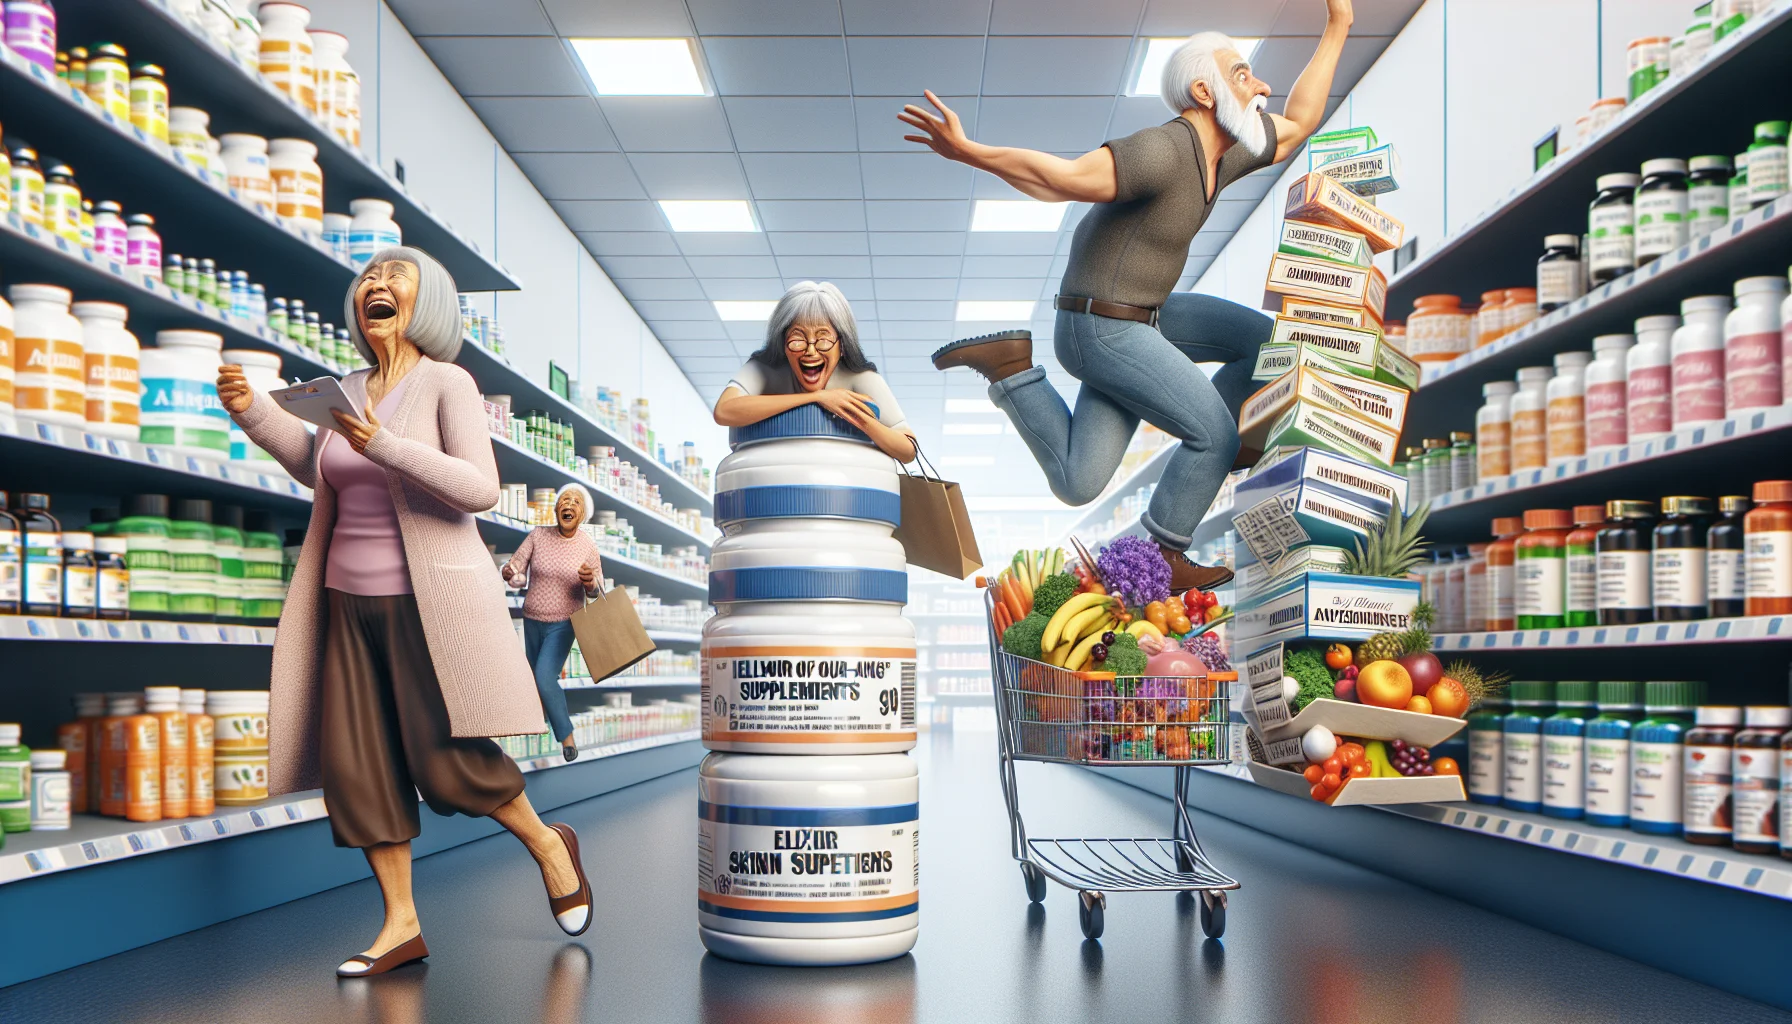 Imagine a humorous realistic scenario in a health store. An elderly Caucasian man with a twinkle in his eye is attempting to balance a towering pile of different anti-aging skin supplements in his arms, while standing on one leg. An elderly Asian woman is nearby, laughing heartily, holding a shopping list titled 'Elixir of Youth' overflowing with healthy dietary items. In another aisle, an elderly Black woman is energetically racing a shopping cart filled with a colourful abundance of fresh fruits and vegetables. Emphasize the pleasant and light-hearted atmosphere of the scene.